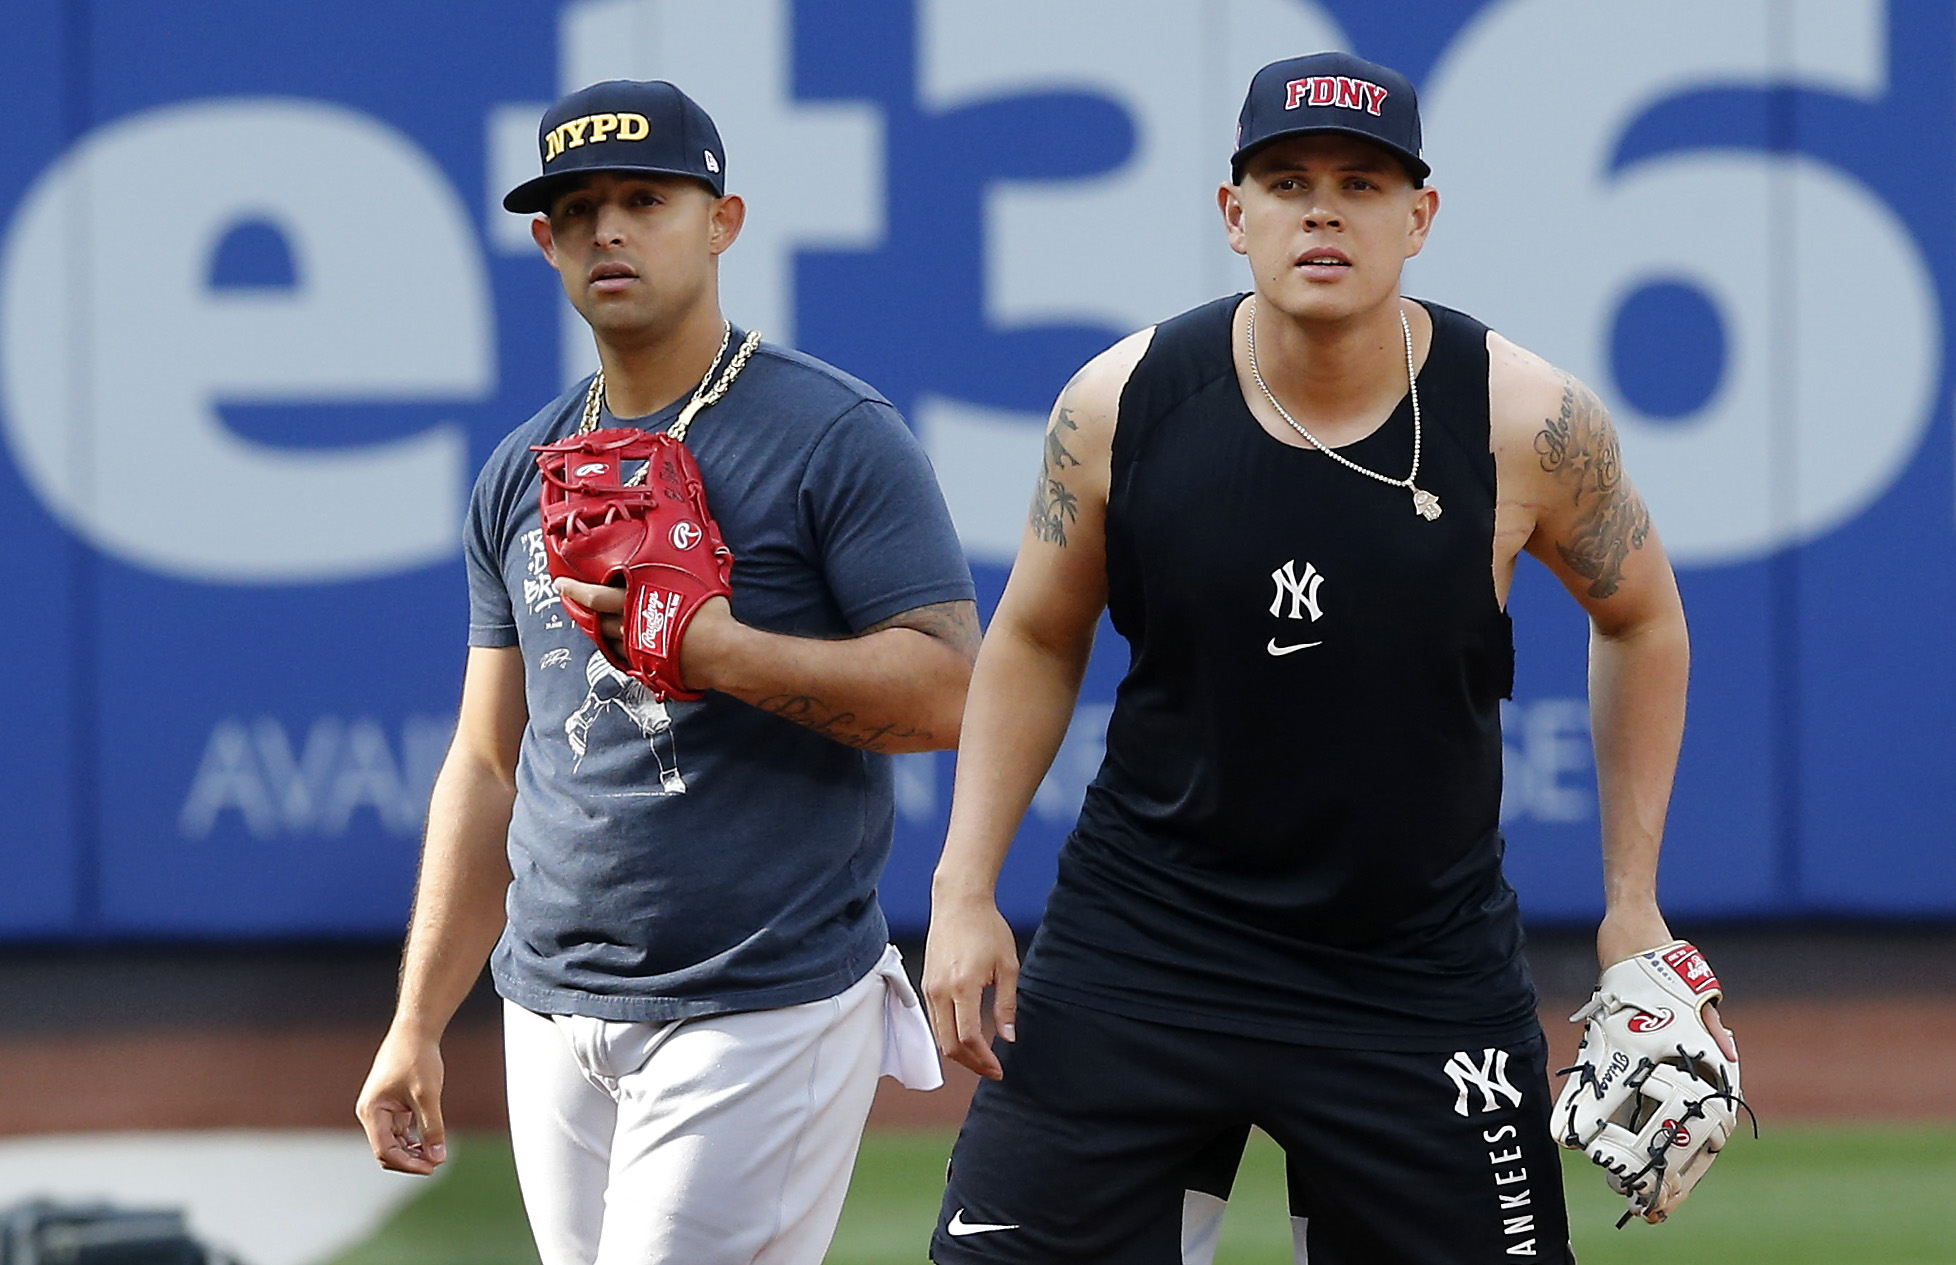 9/11: Yankees, Mets toe line together as one unified New York